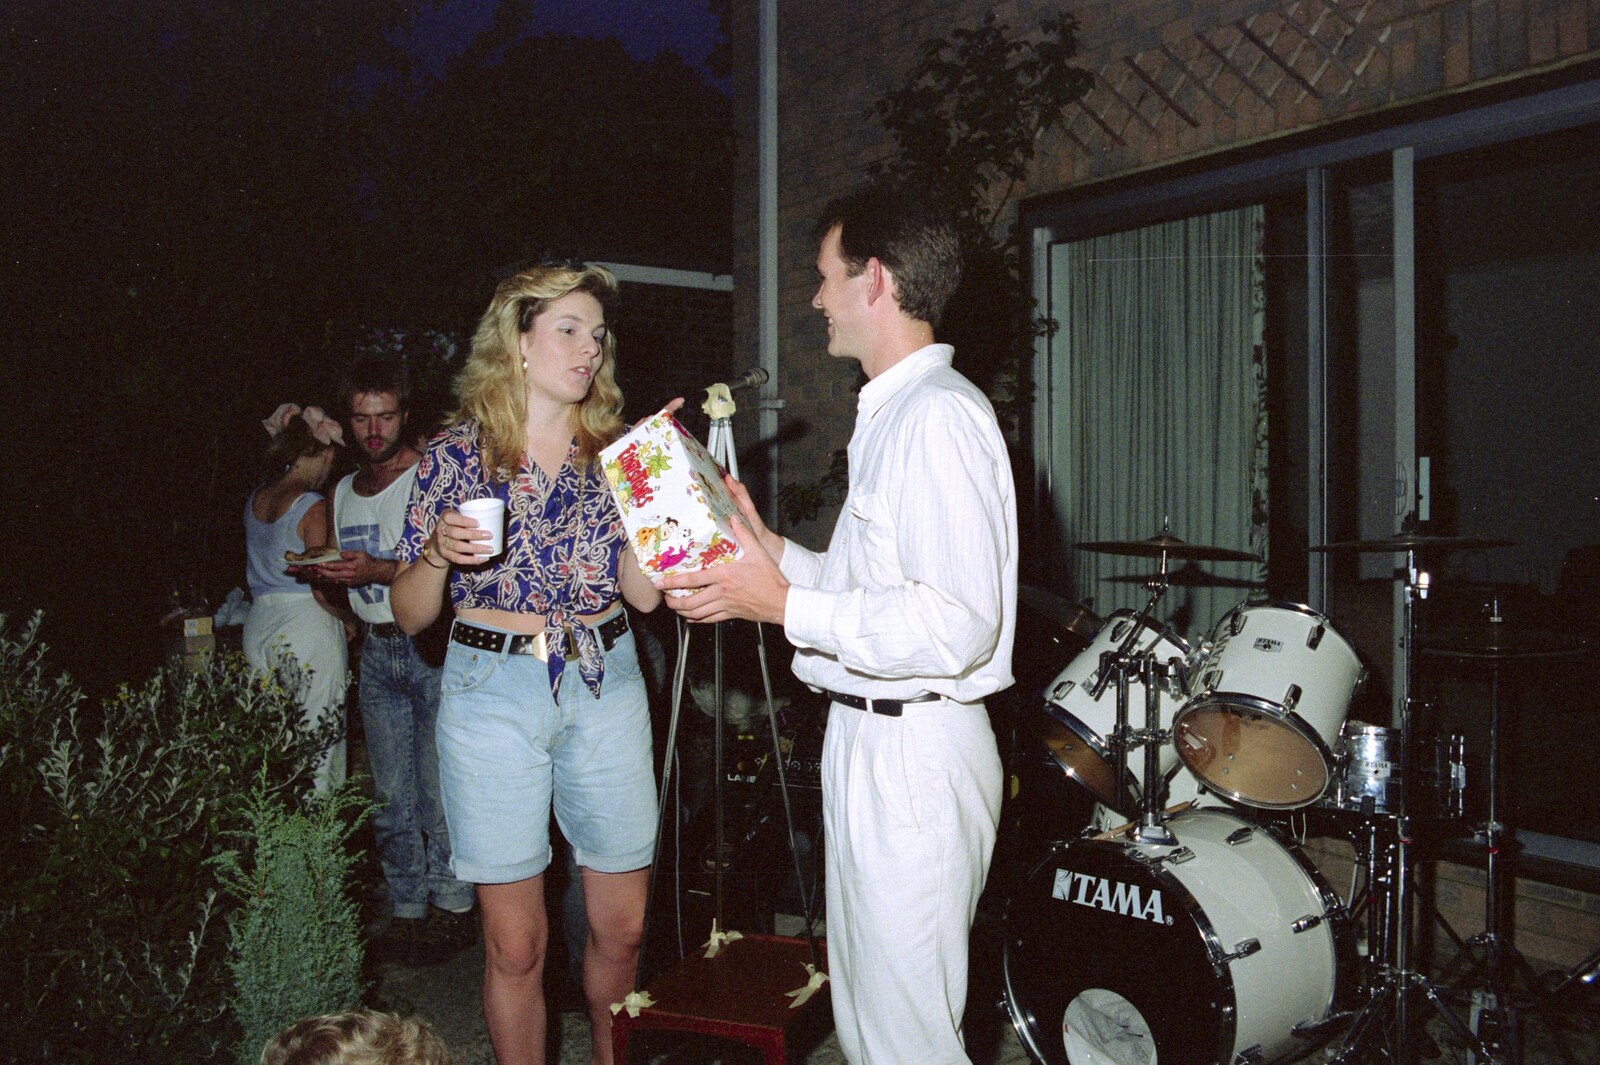 Chris and Phil's Party, Hordle, Hampshire - 6th September 1989: Phil gets a present